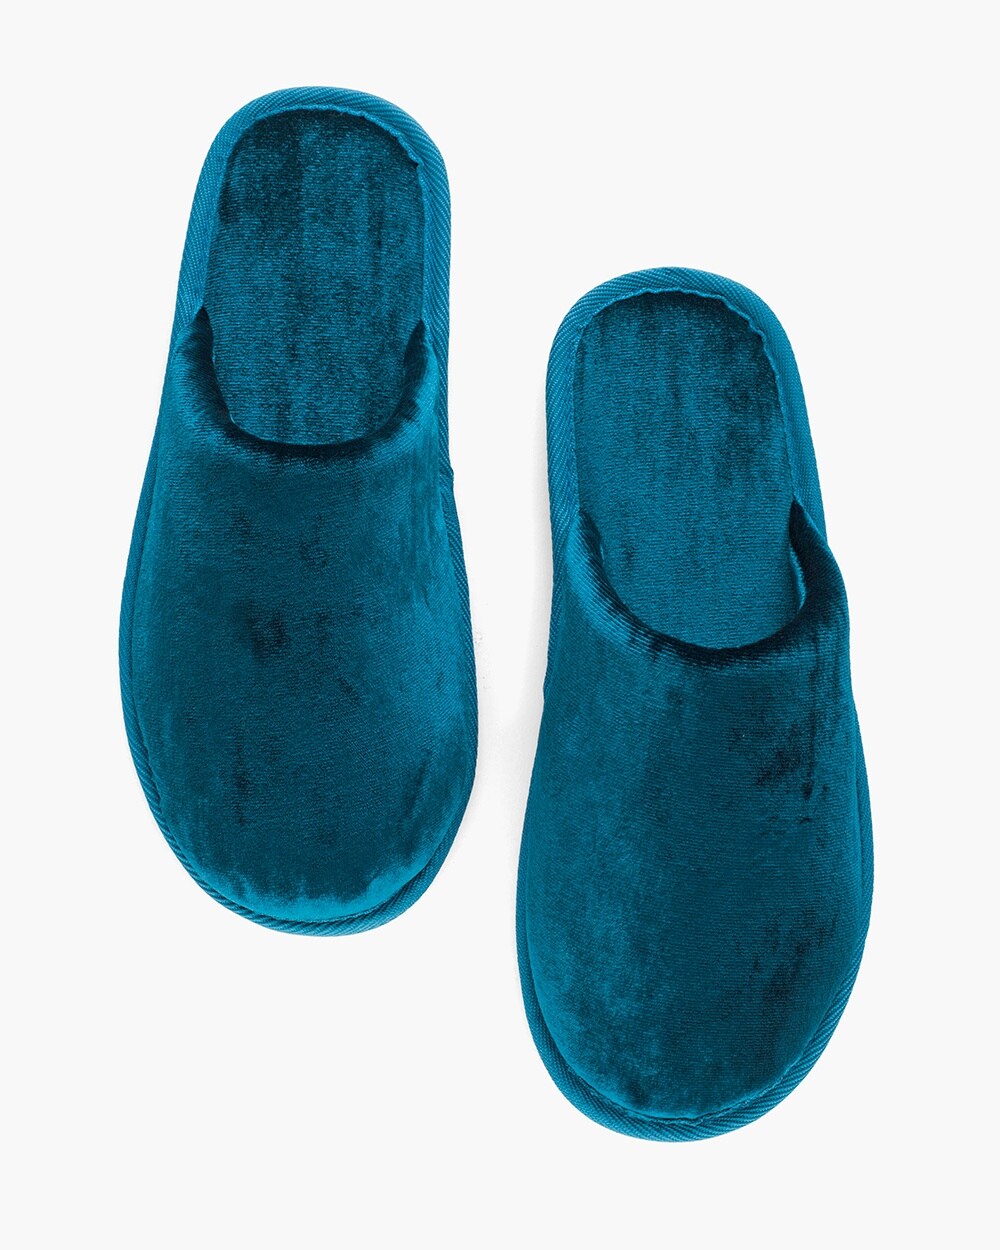 teal slippers